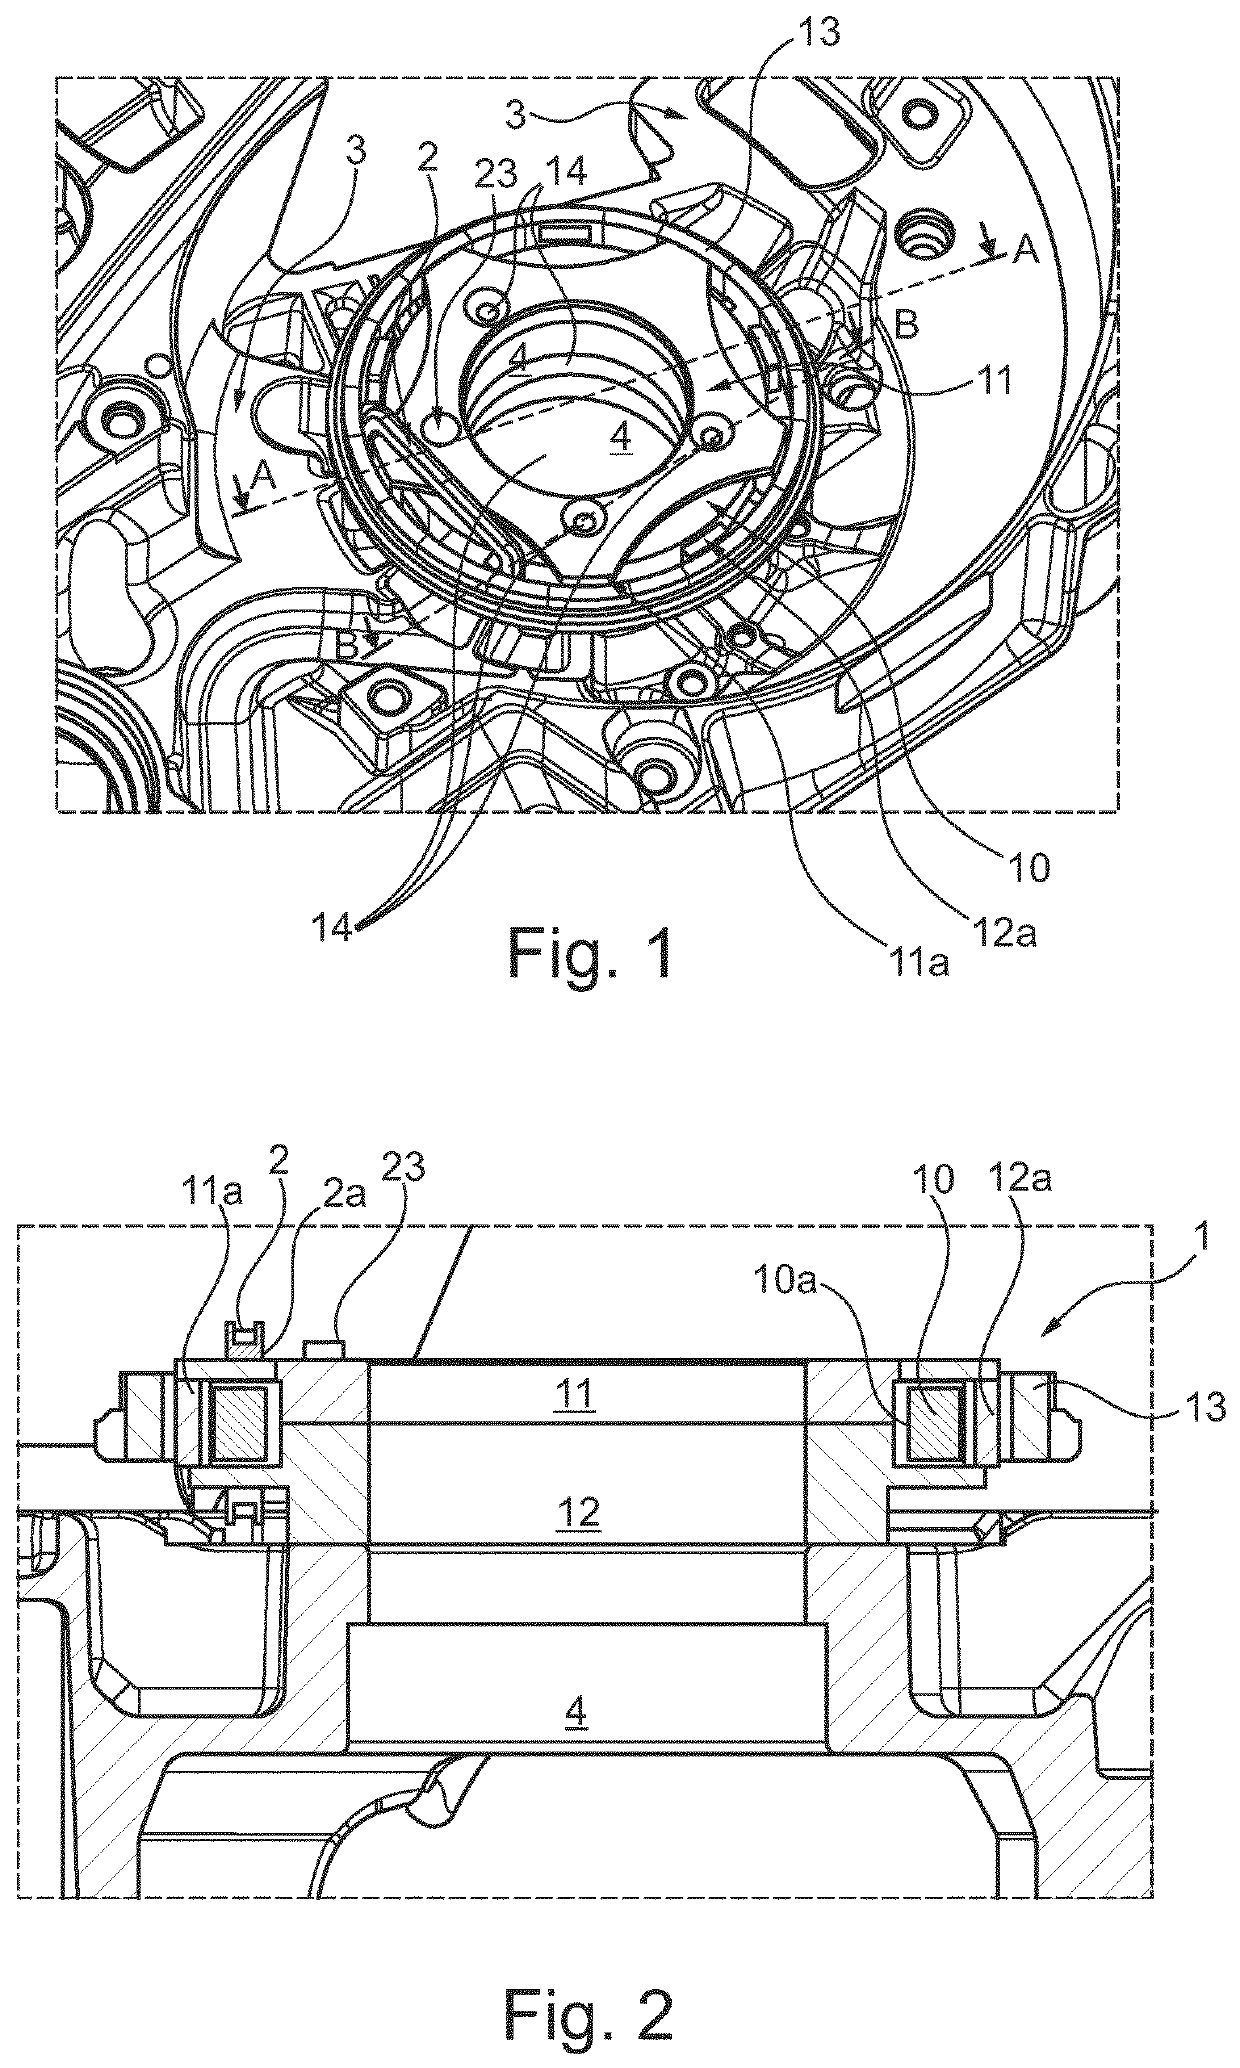 Crankshaft driven flywheel magneto generator with circular winding for power supply in handheld batteryless combustion engines